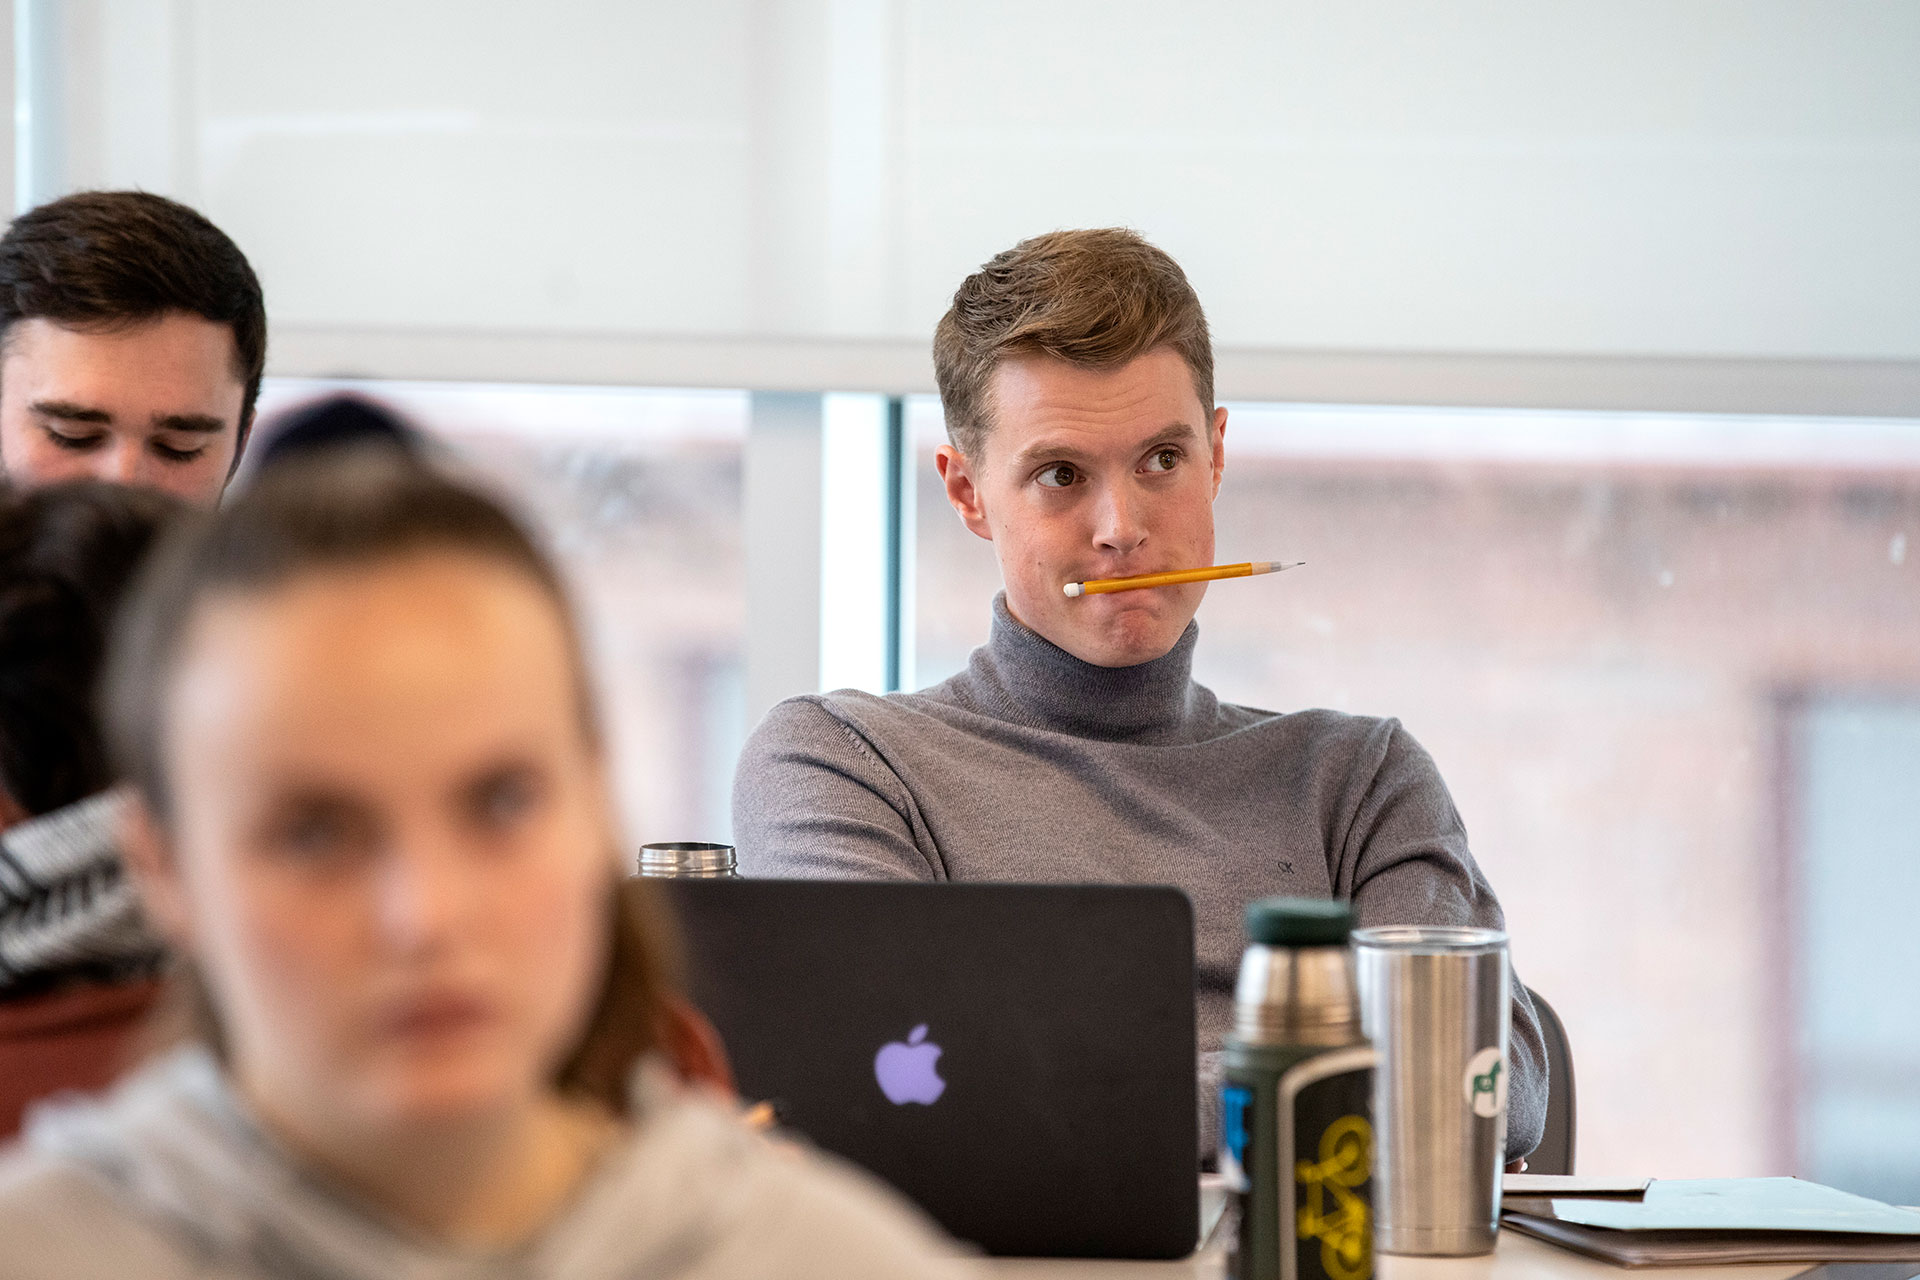 David Lamis ’19 listens carefully during a classroom discussion.